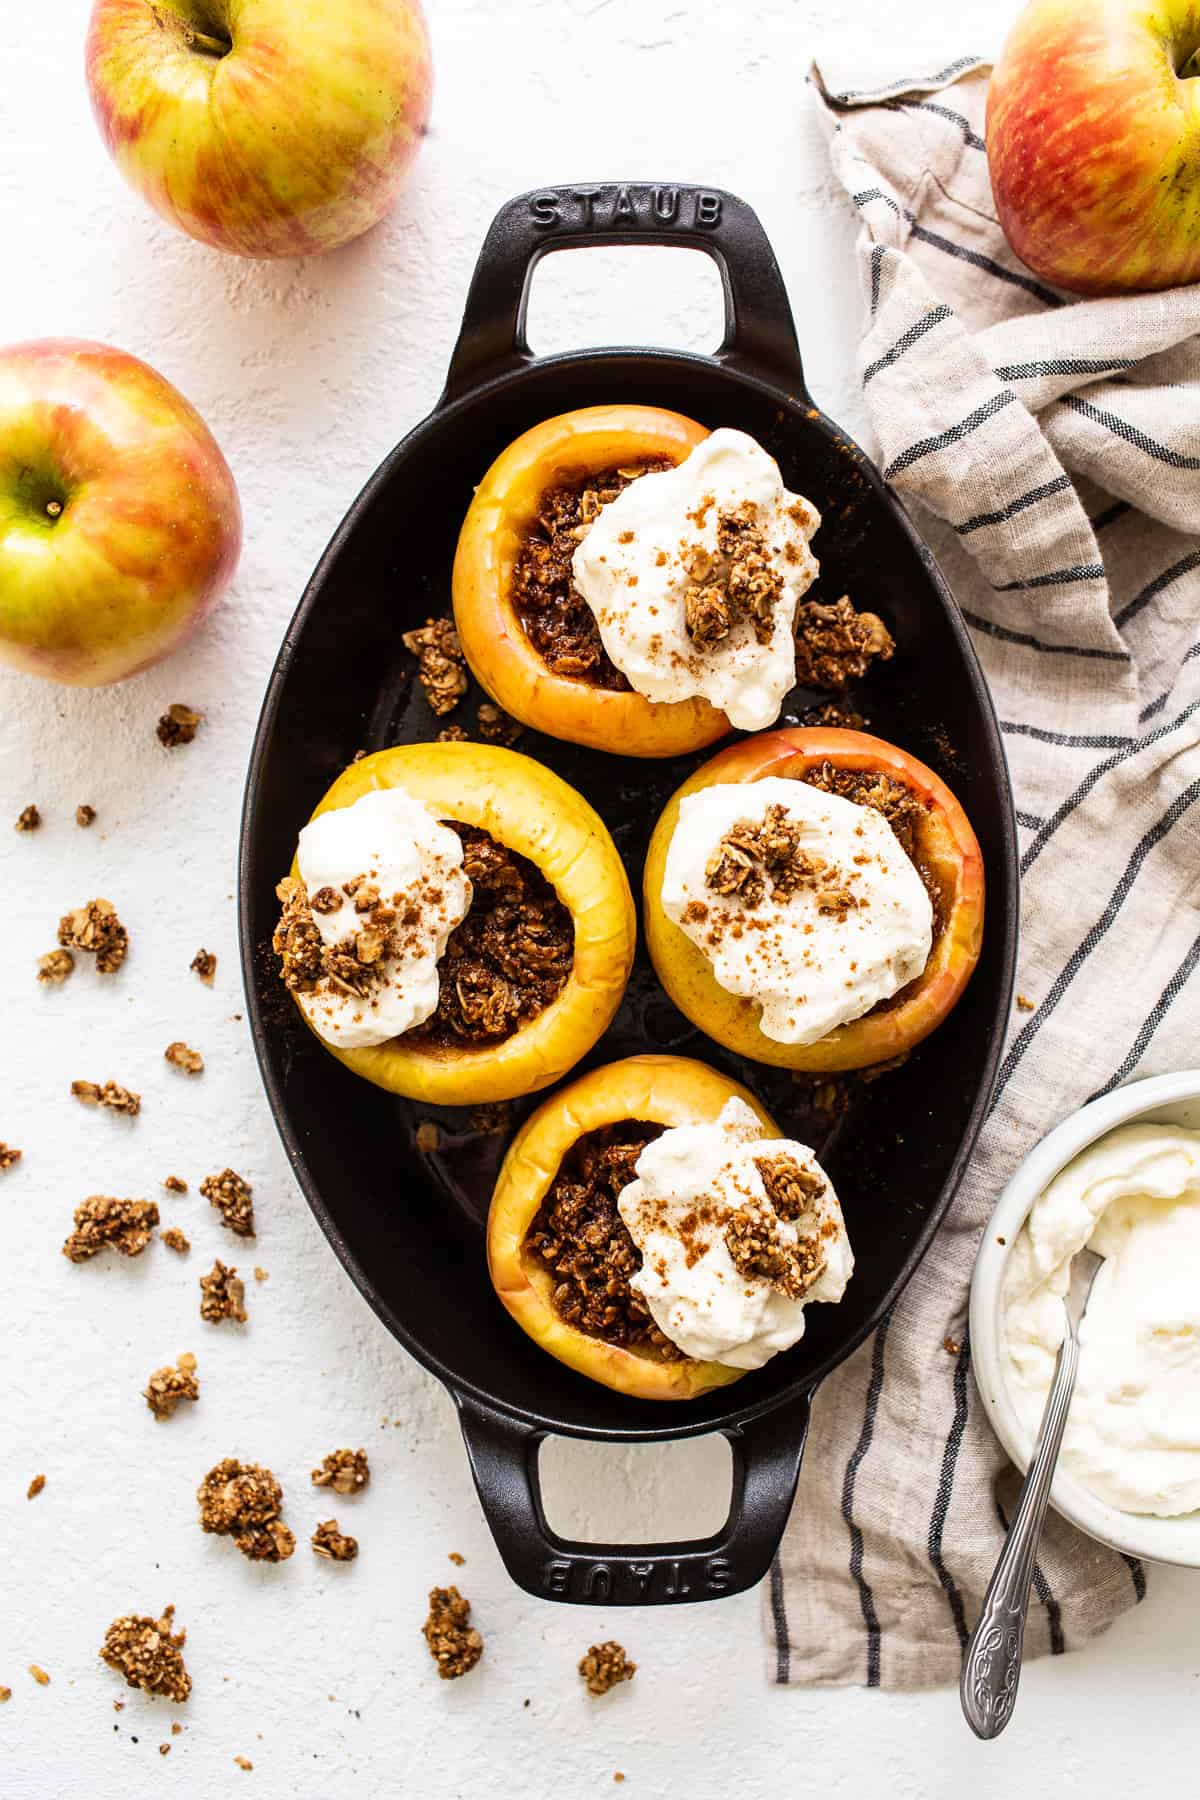 Baked apples topped with whipped cream.